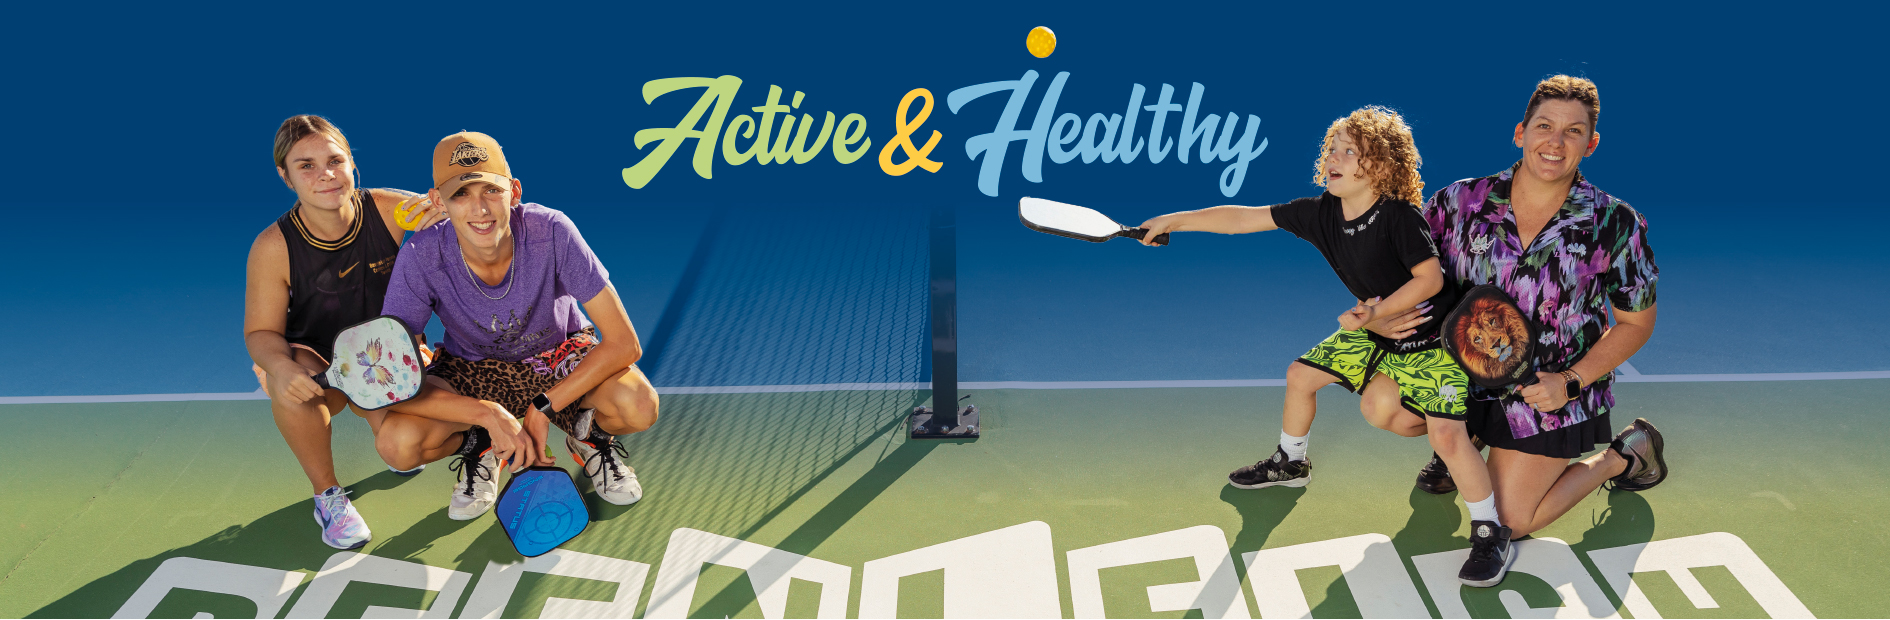 Two sets of two people smile while crouching on opposite sides of a tennis court. Logo reads: Active and Healthy